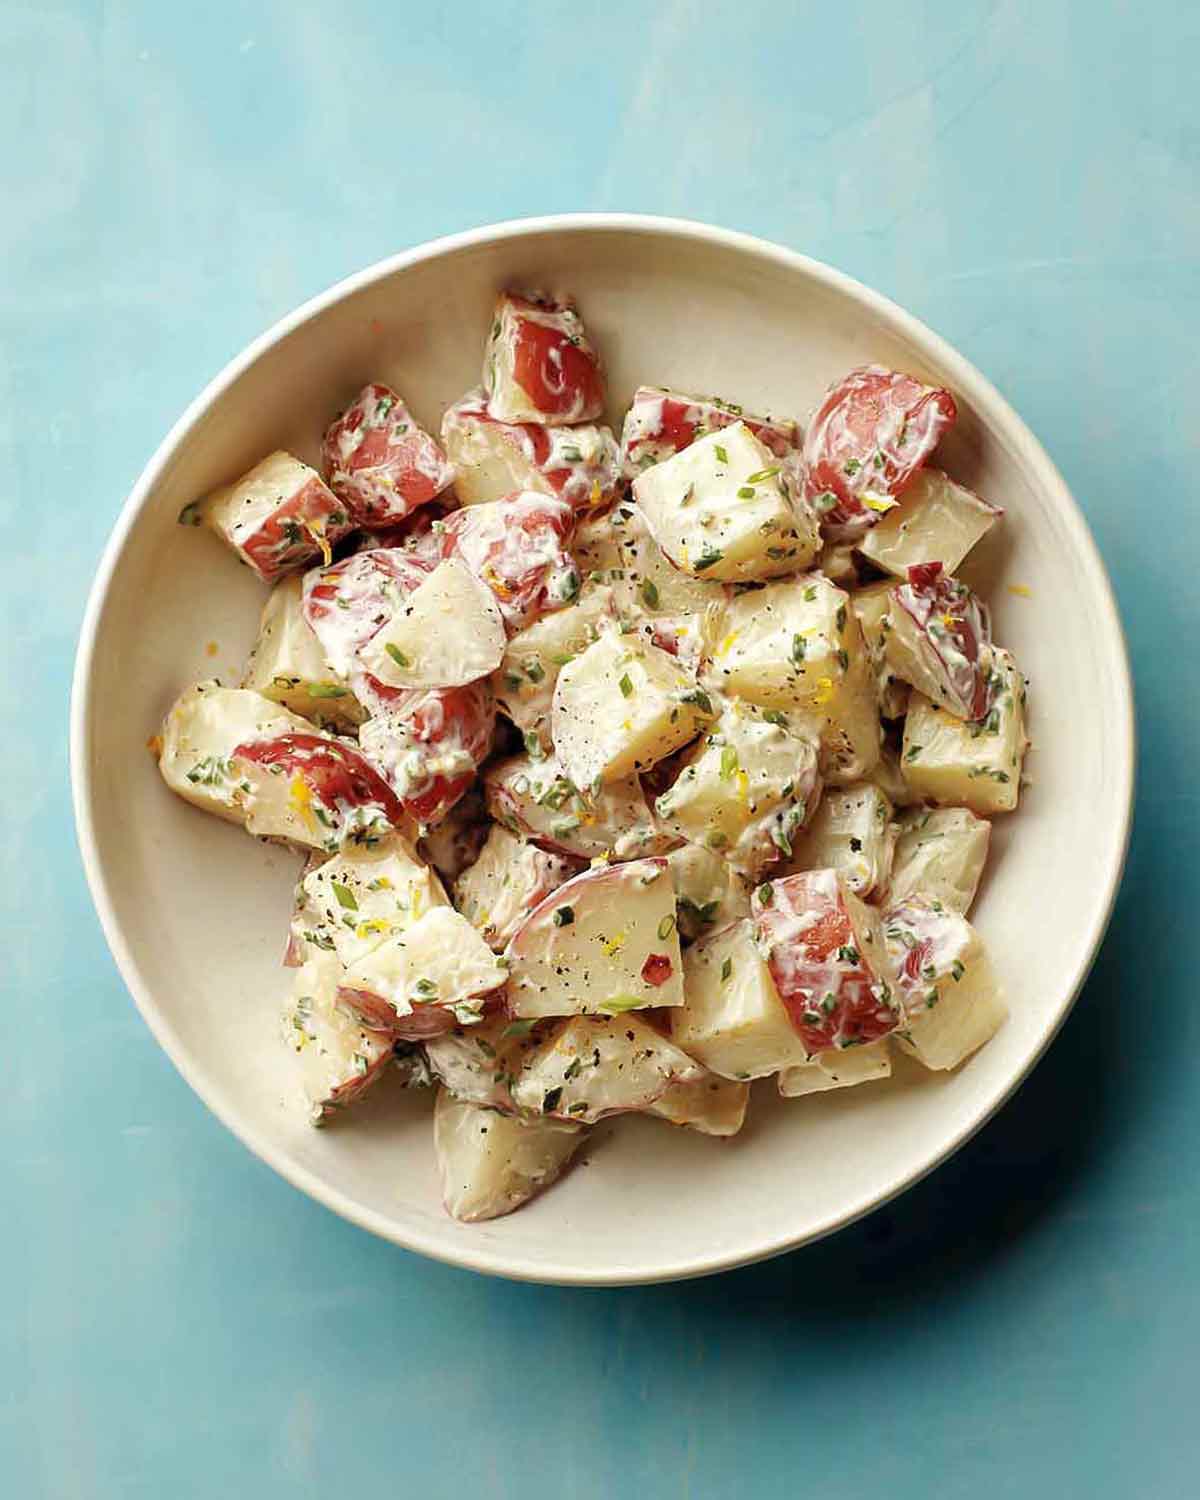 A white bowl filled with red potato salad with a creamy dressing.